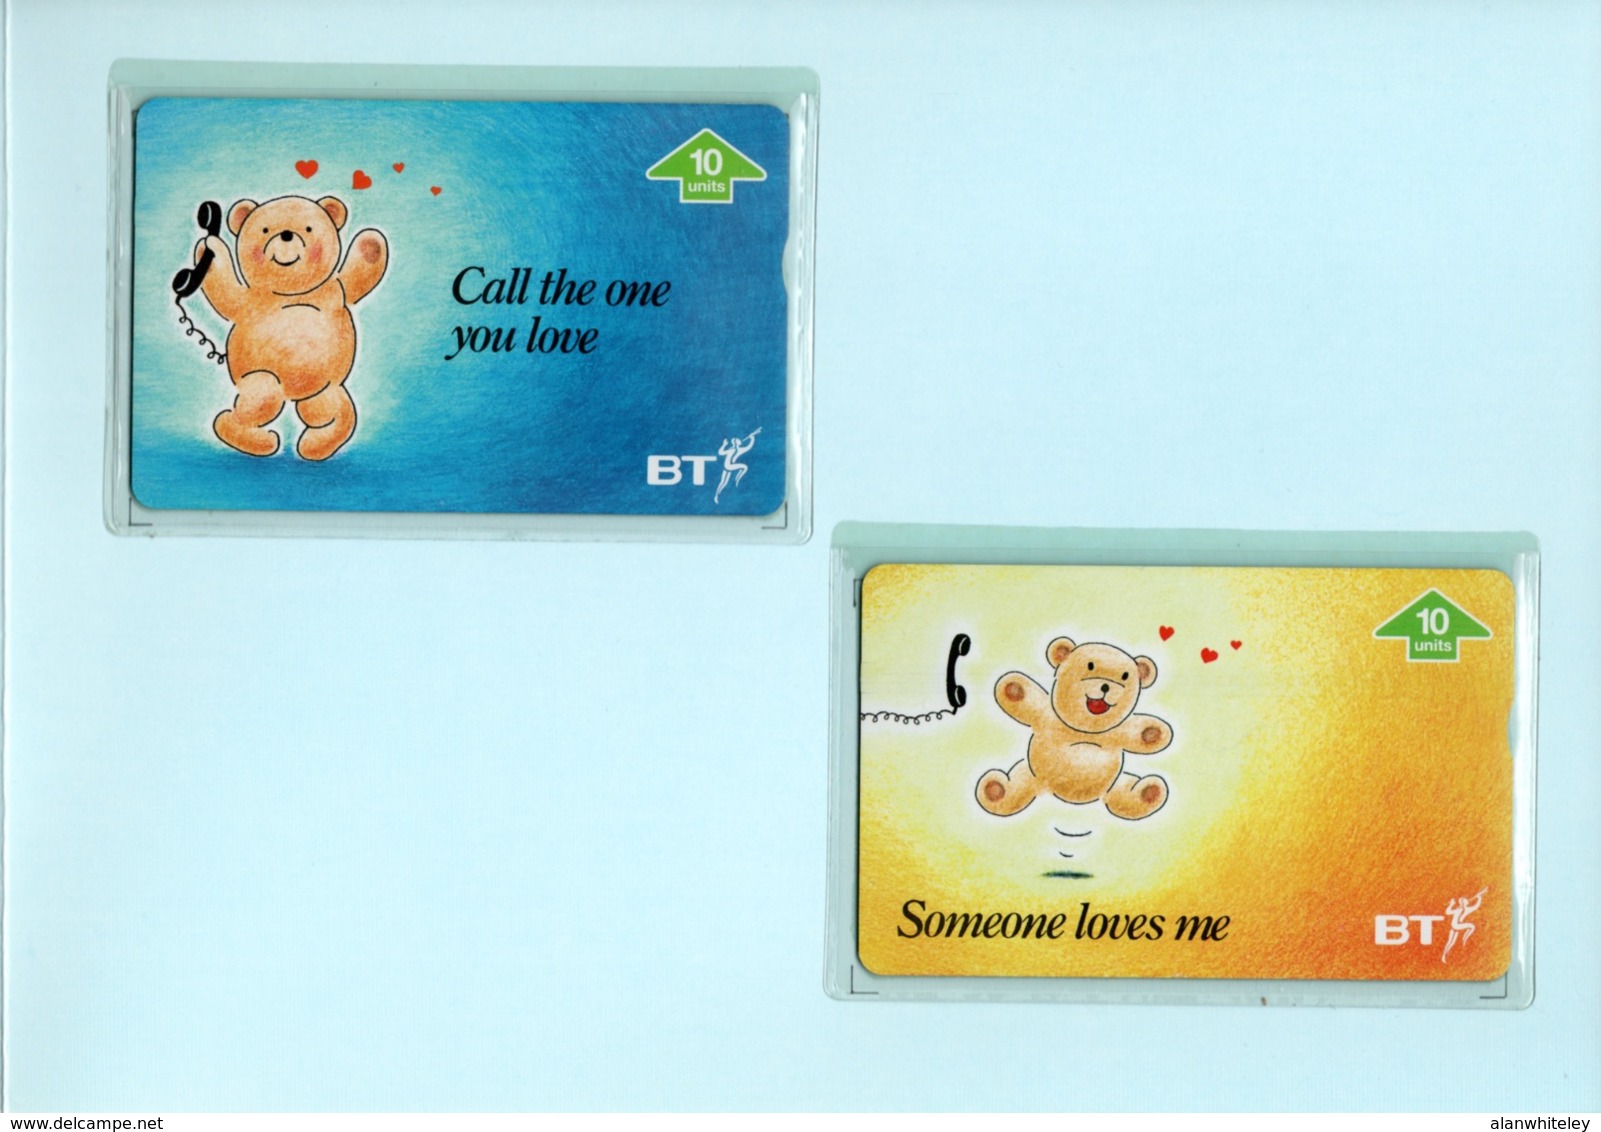 GREAT BRITAIN 1995 Valentine: Presentation Pack Containing 2 Phonecards MINT/UNUSED - BT Global Cards (Prepaid)